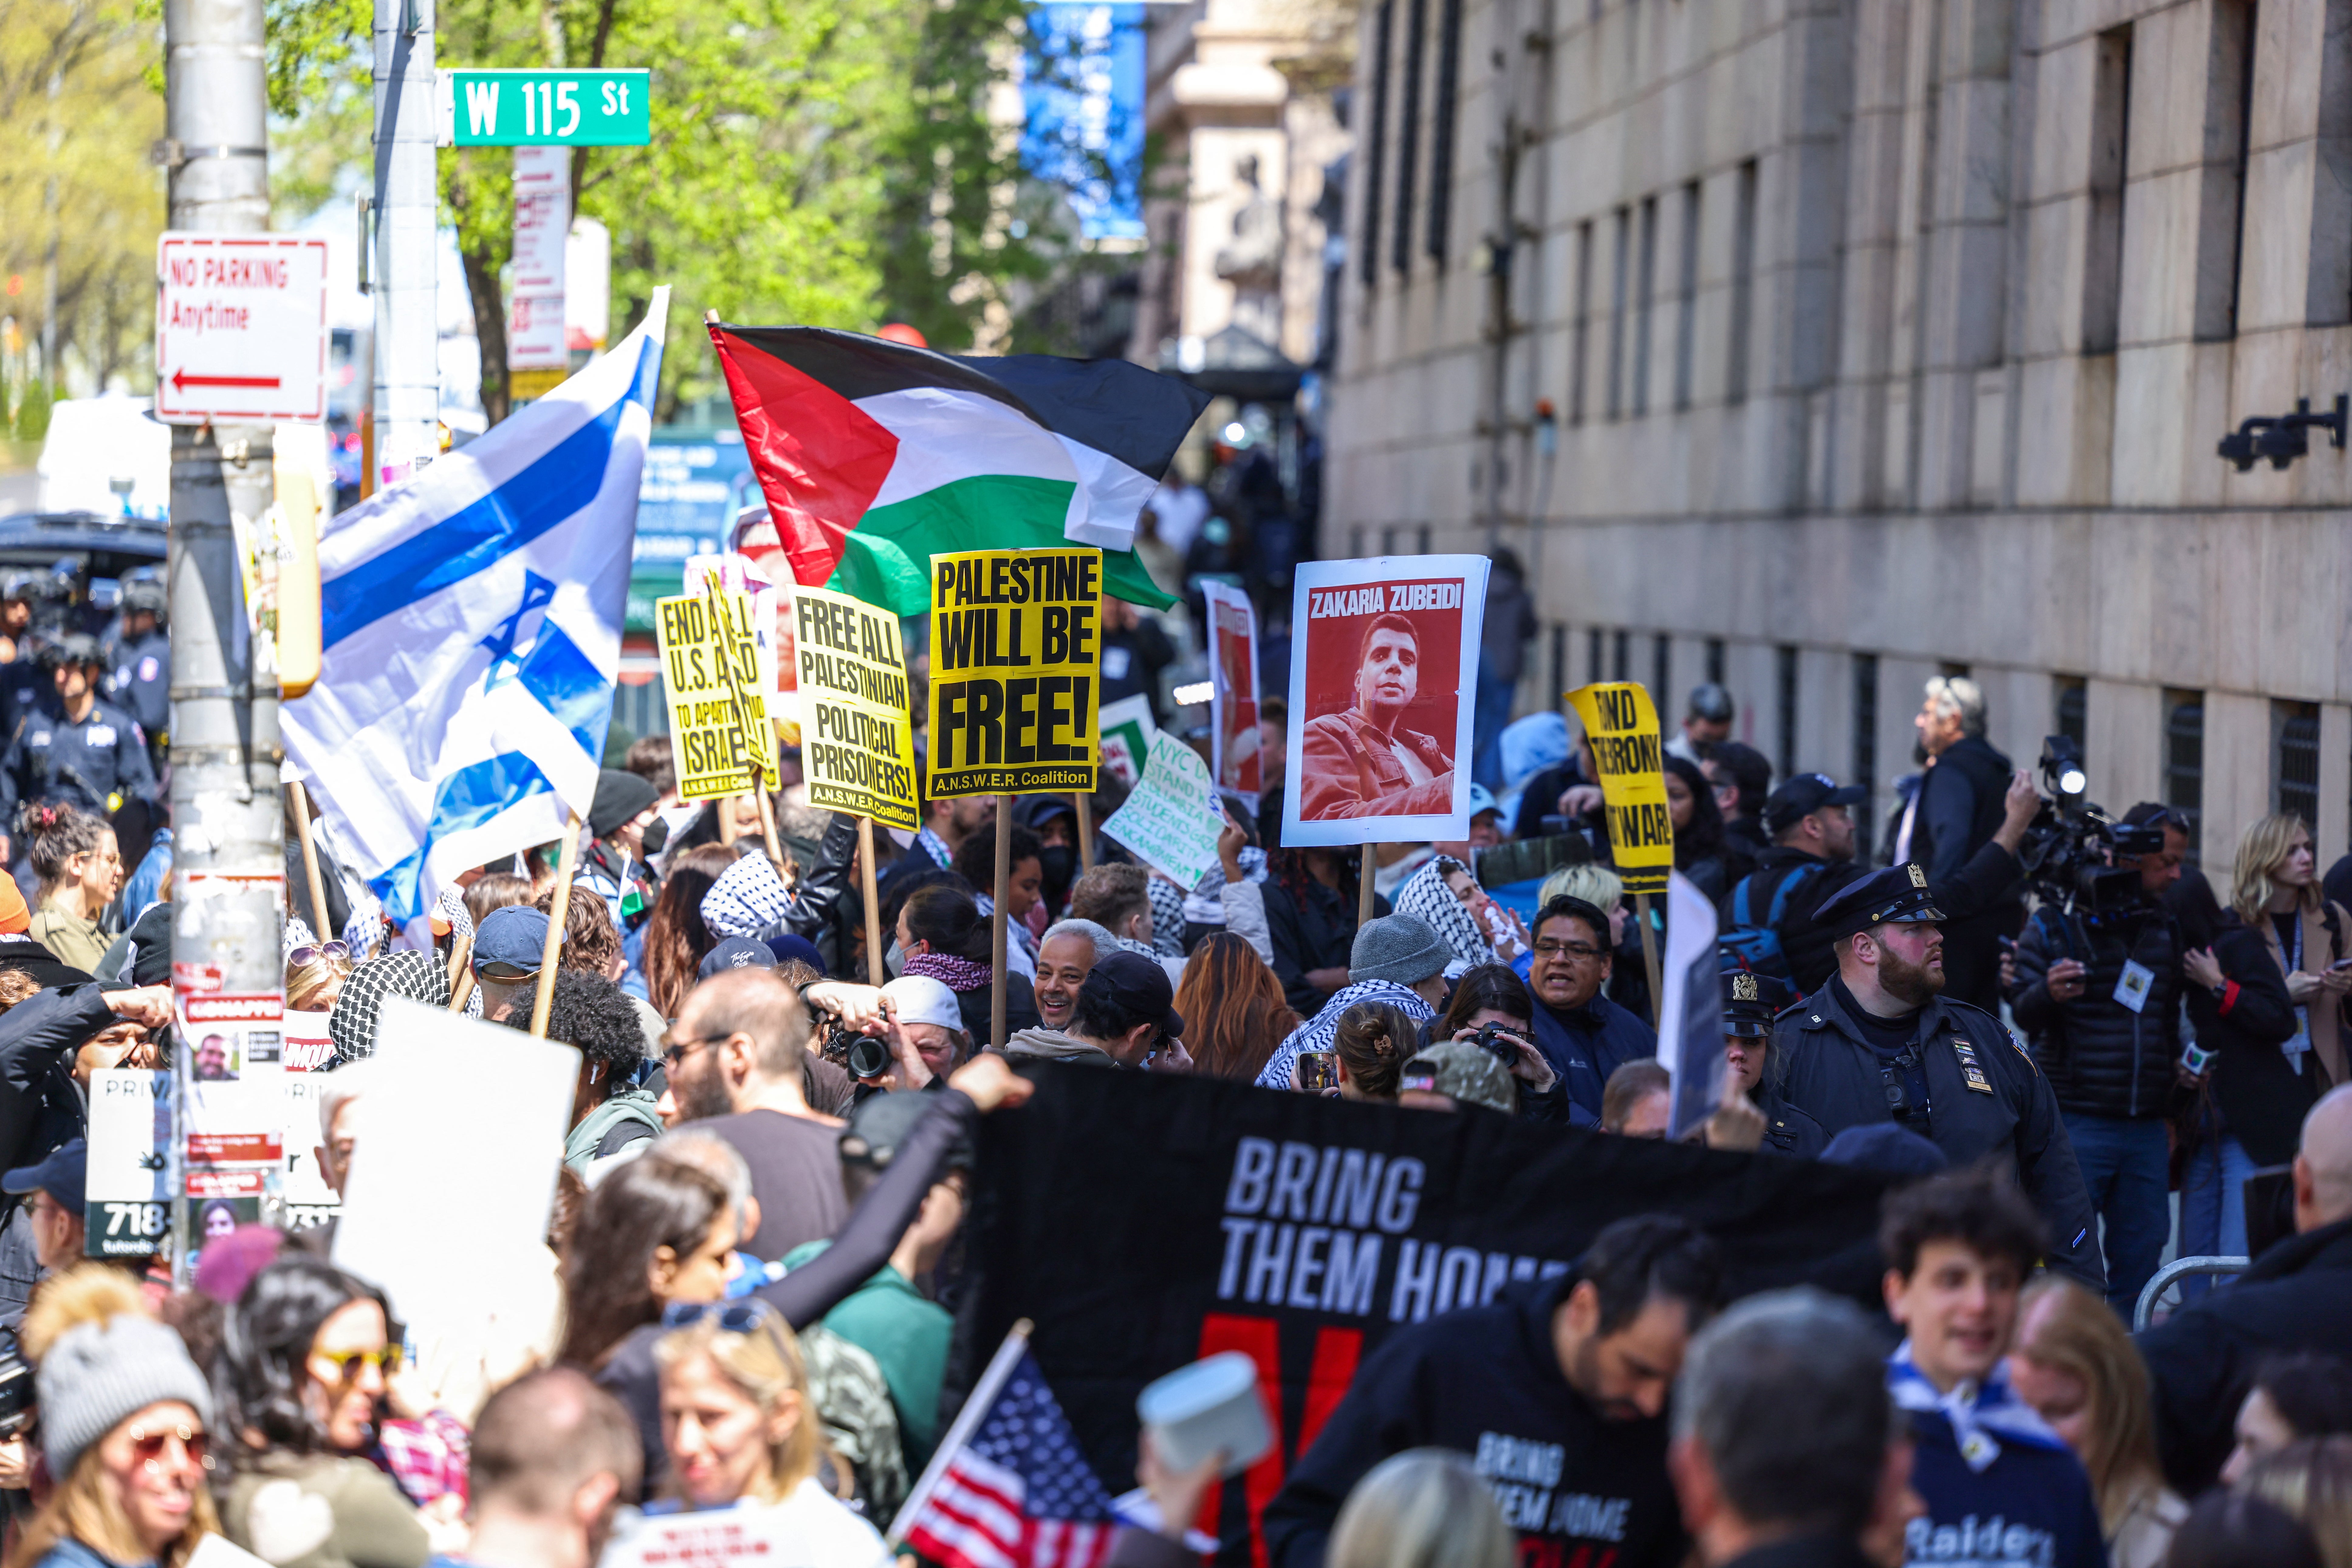 Pro-Palestinian and Pro-israel face off in front of the entrance of Columbia University which is occupied by Pro-Palestinian protesters in New York on April 22, 2024.